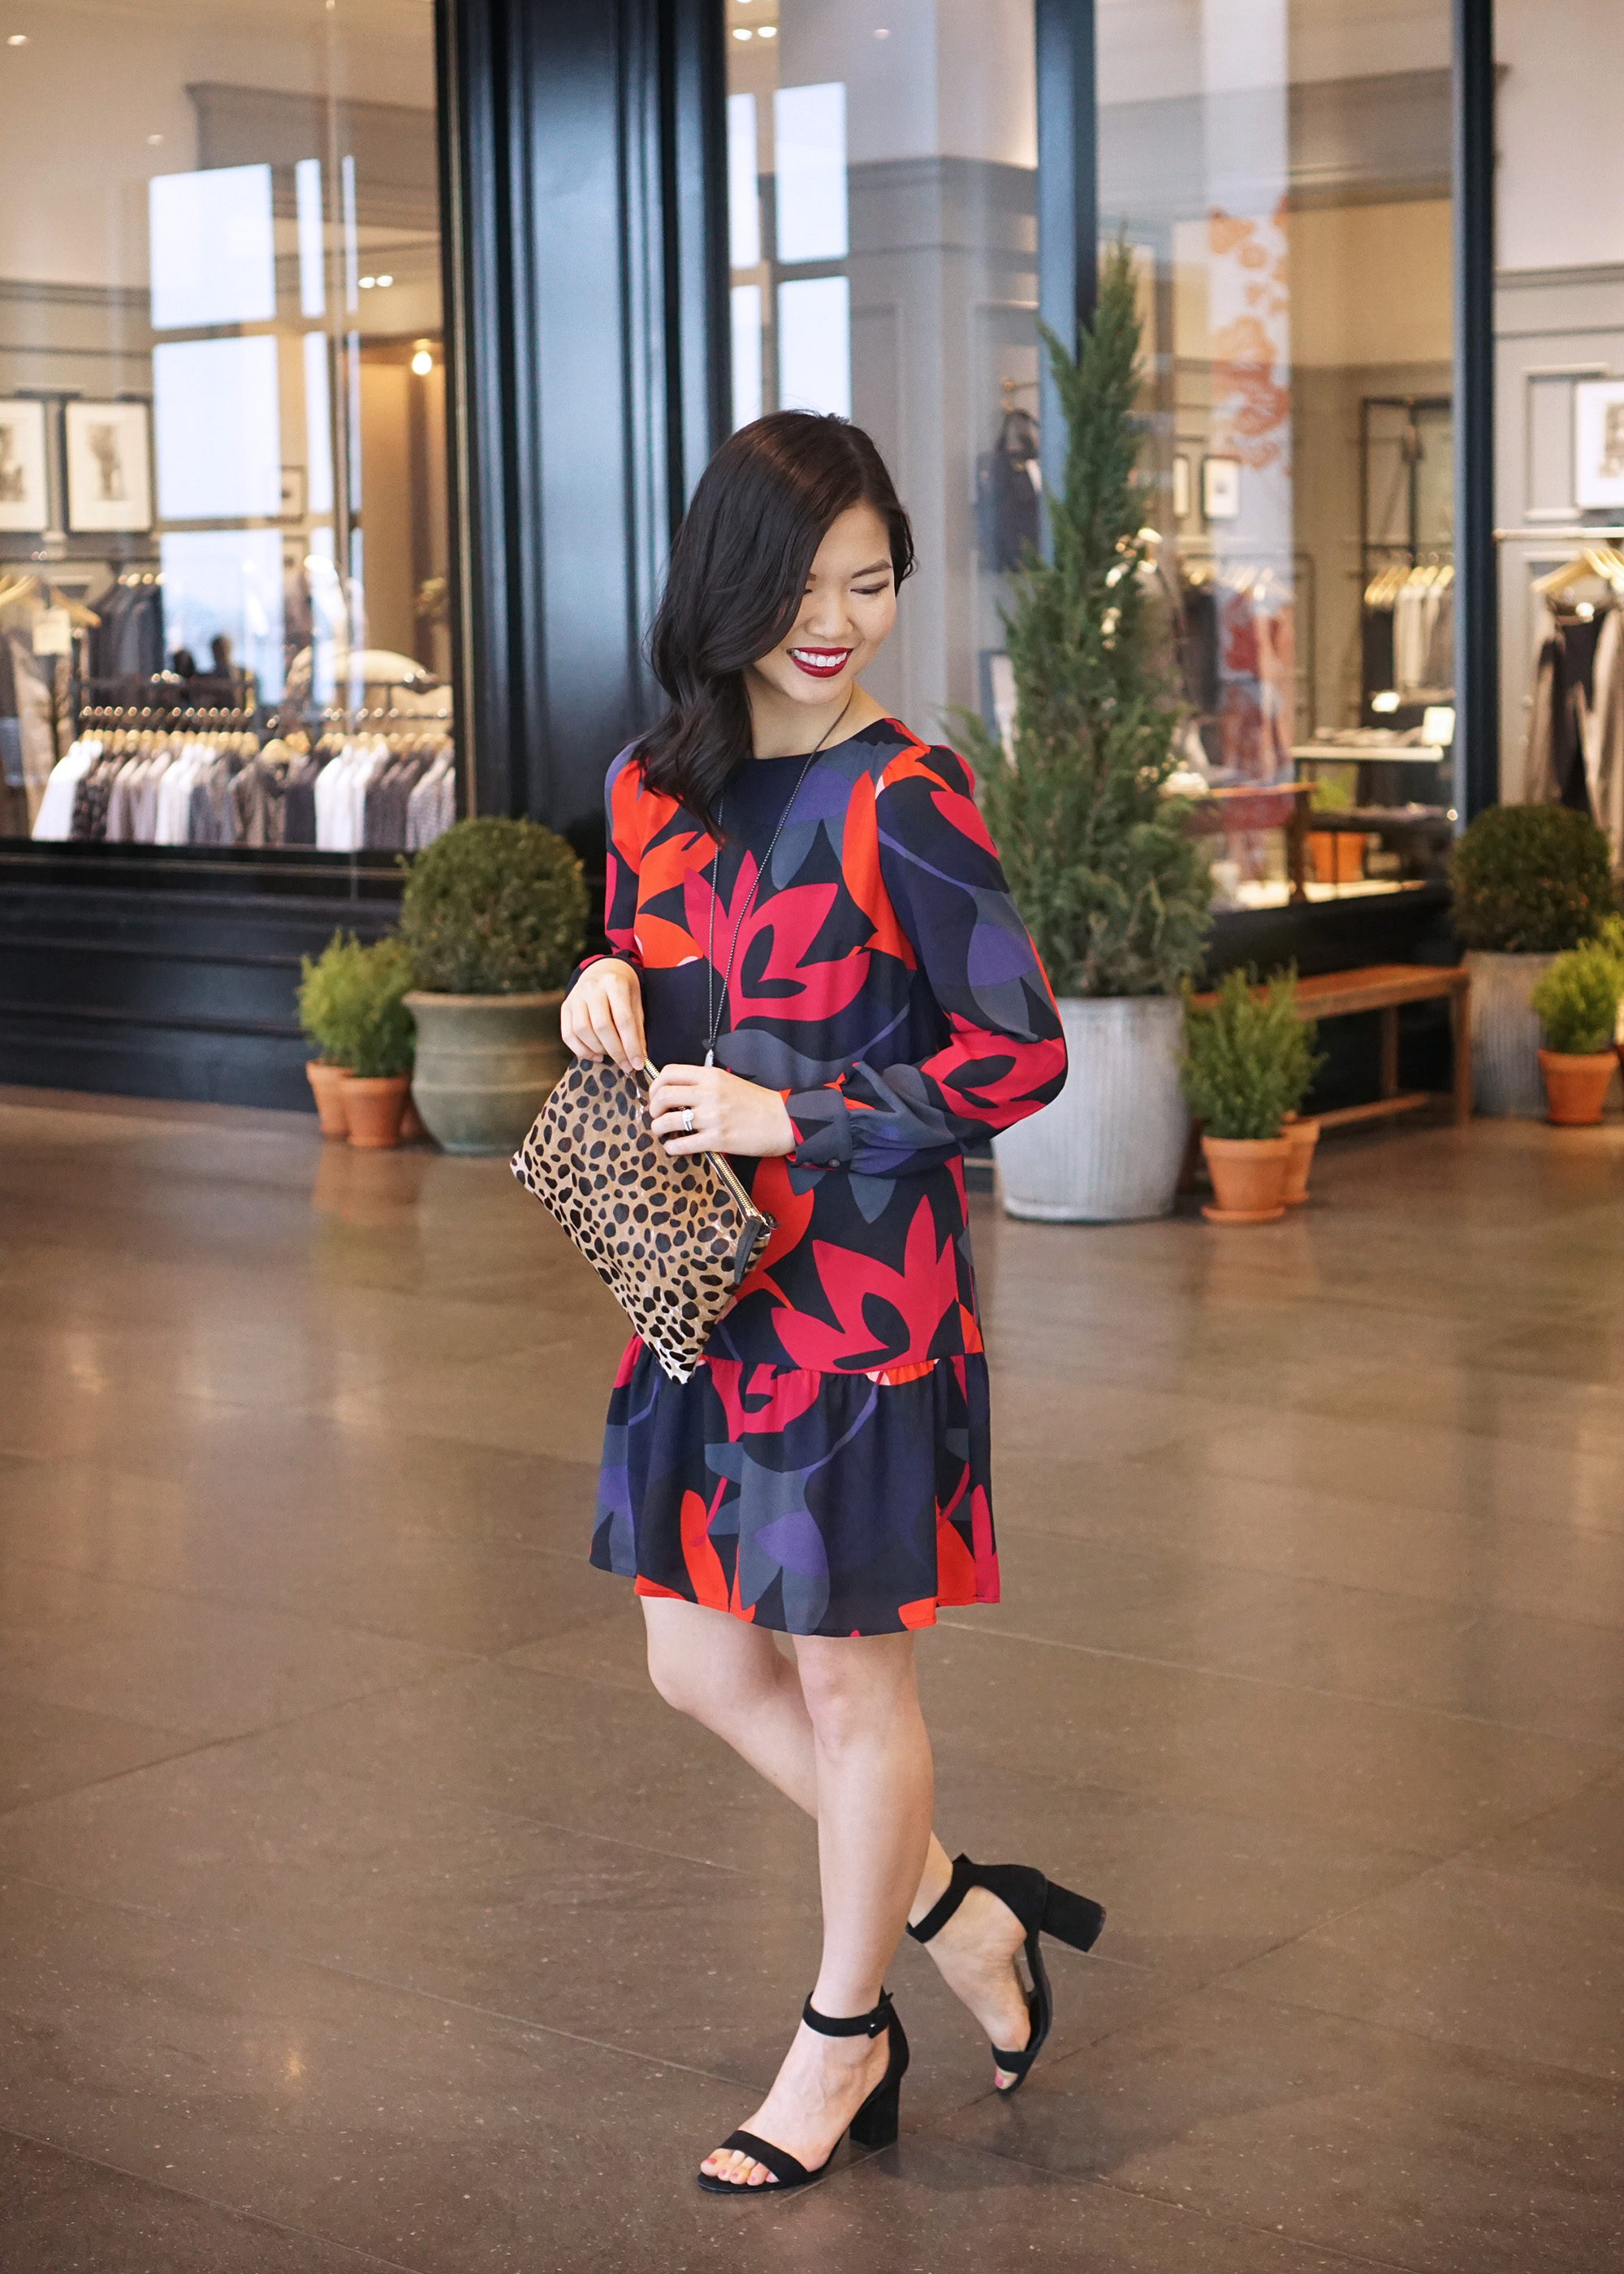 Skirt The Rules / Floral Print Long Sleeve Dress